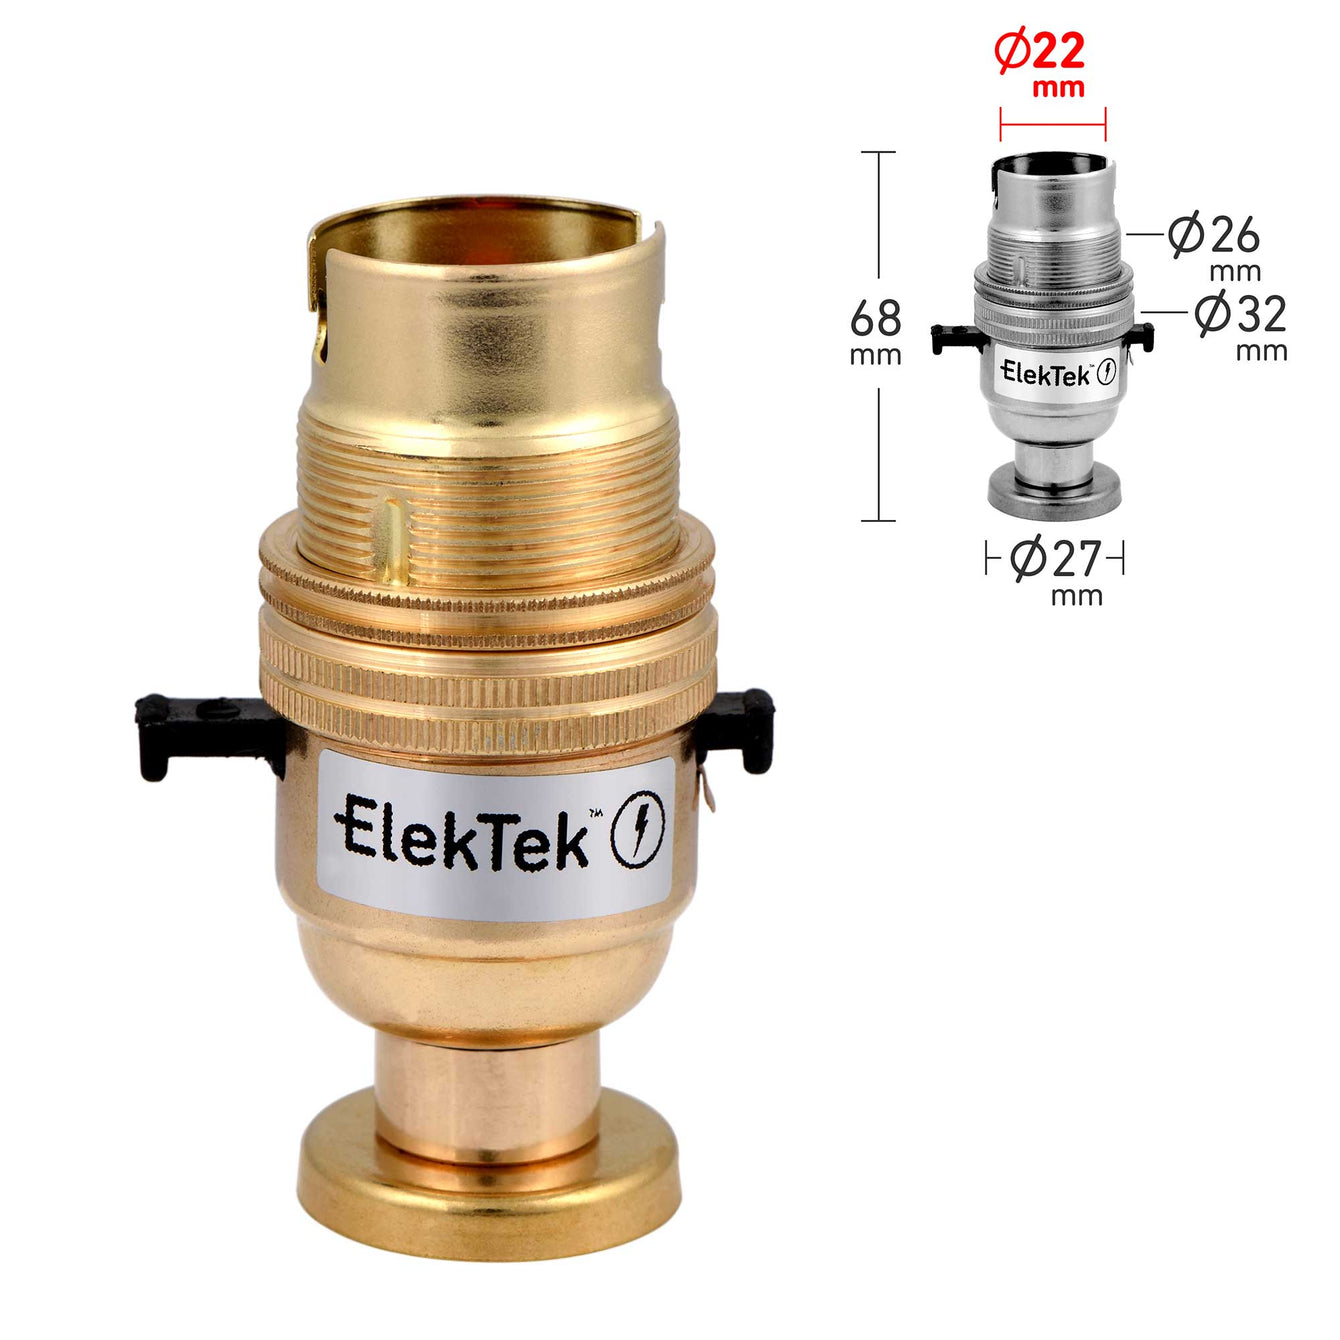 ElekTek Safety Switch Lamp Holder Half Inch Bayonet Cap B22 With Shade Ring Back Plate Cover and Screws Brass Antique Brass